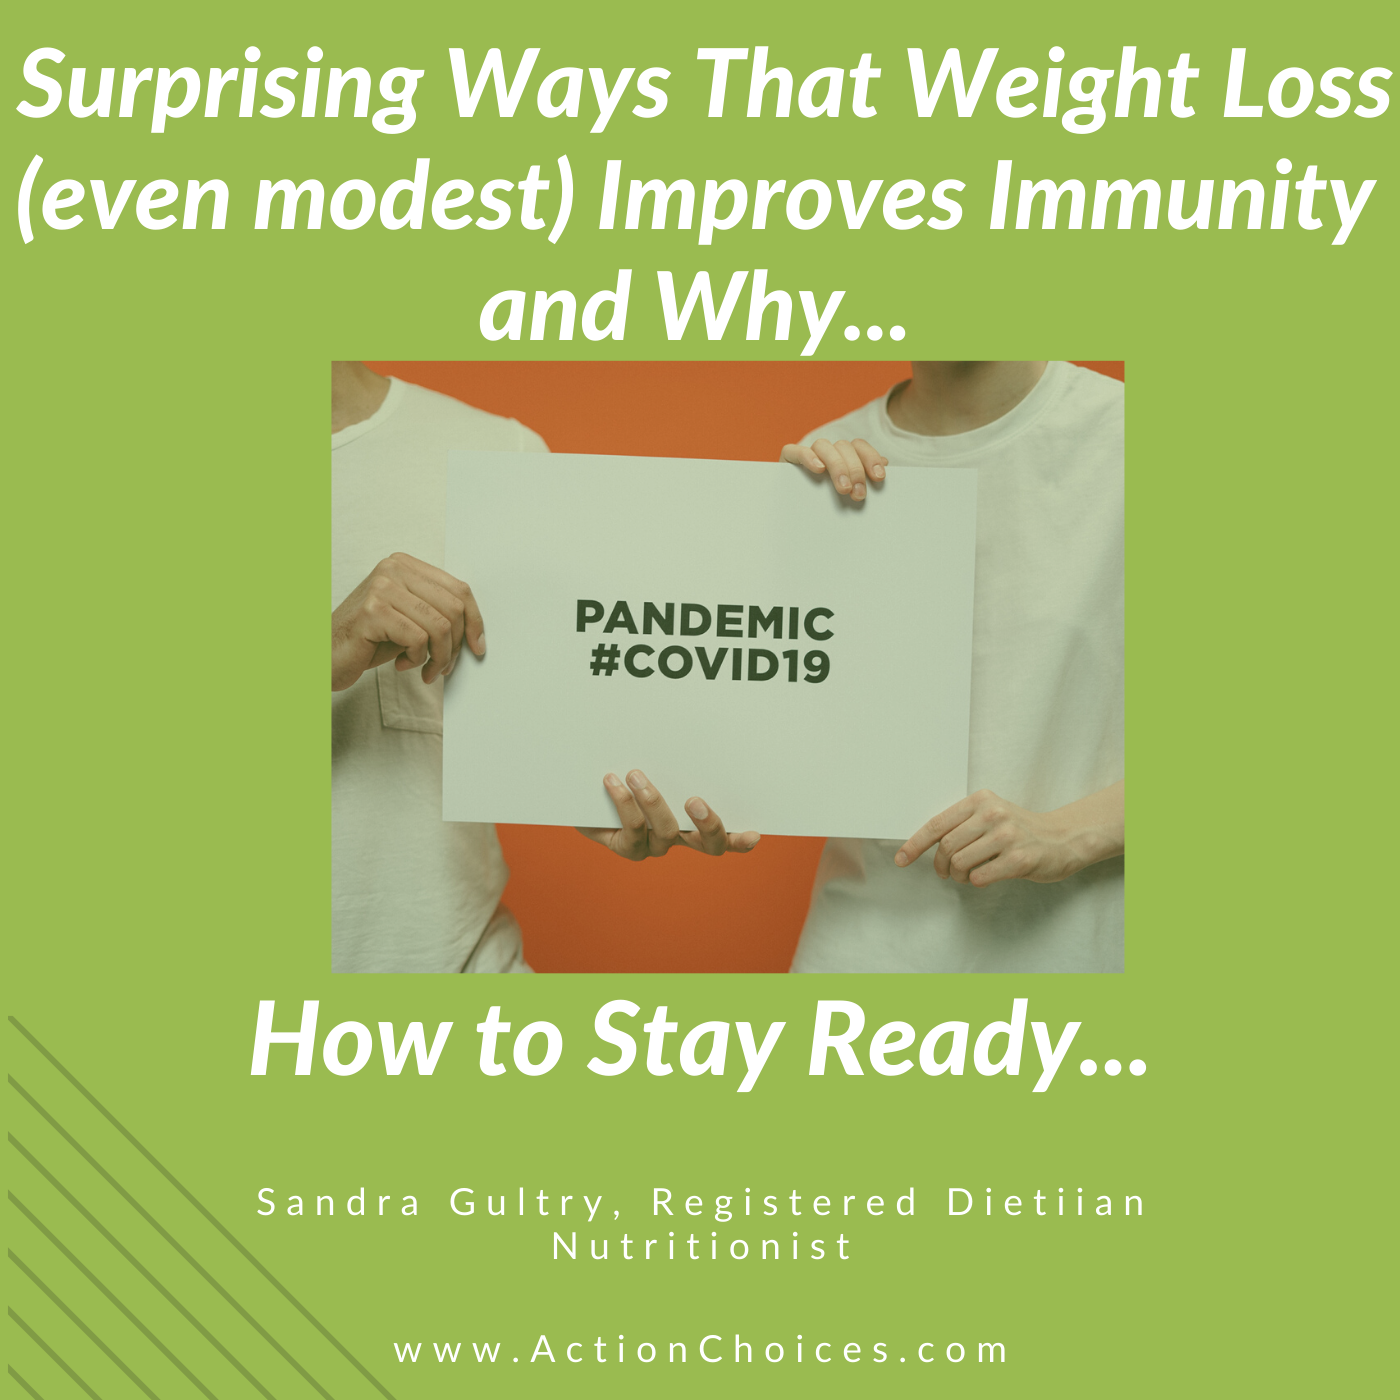 Why Weight Loss Improves Immunity-COVID19